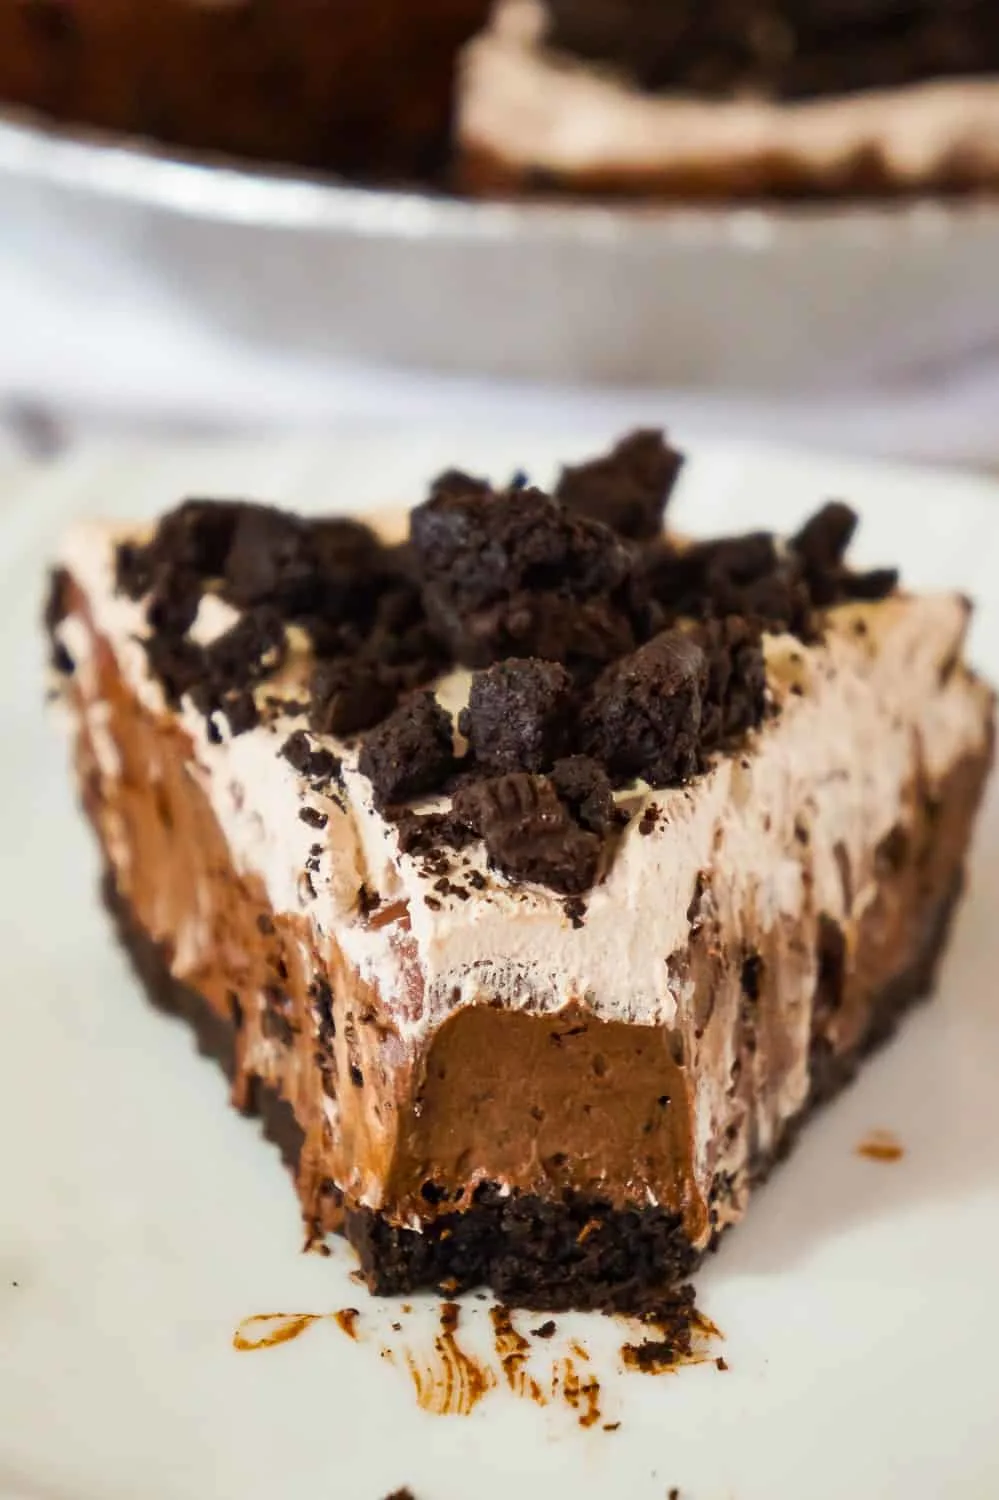 Chocolate Oreo Pie is an easy no bake dessert recipe perfect for when you don't feel like turning on the oven. This decadent pie is made with chocolate instant pudding mix and loaded with Dark Chocolate Oreo cookies.